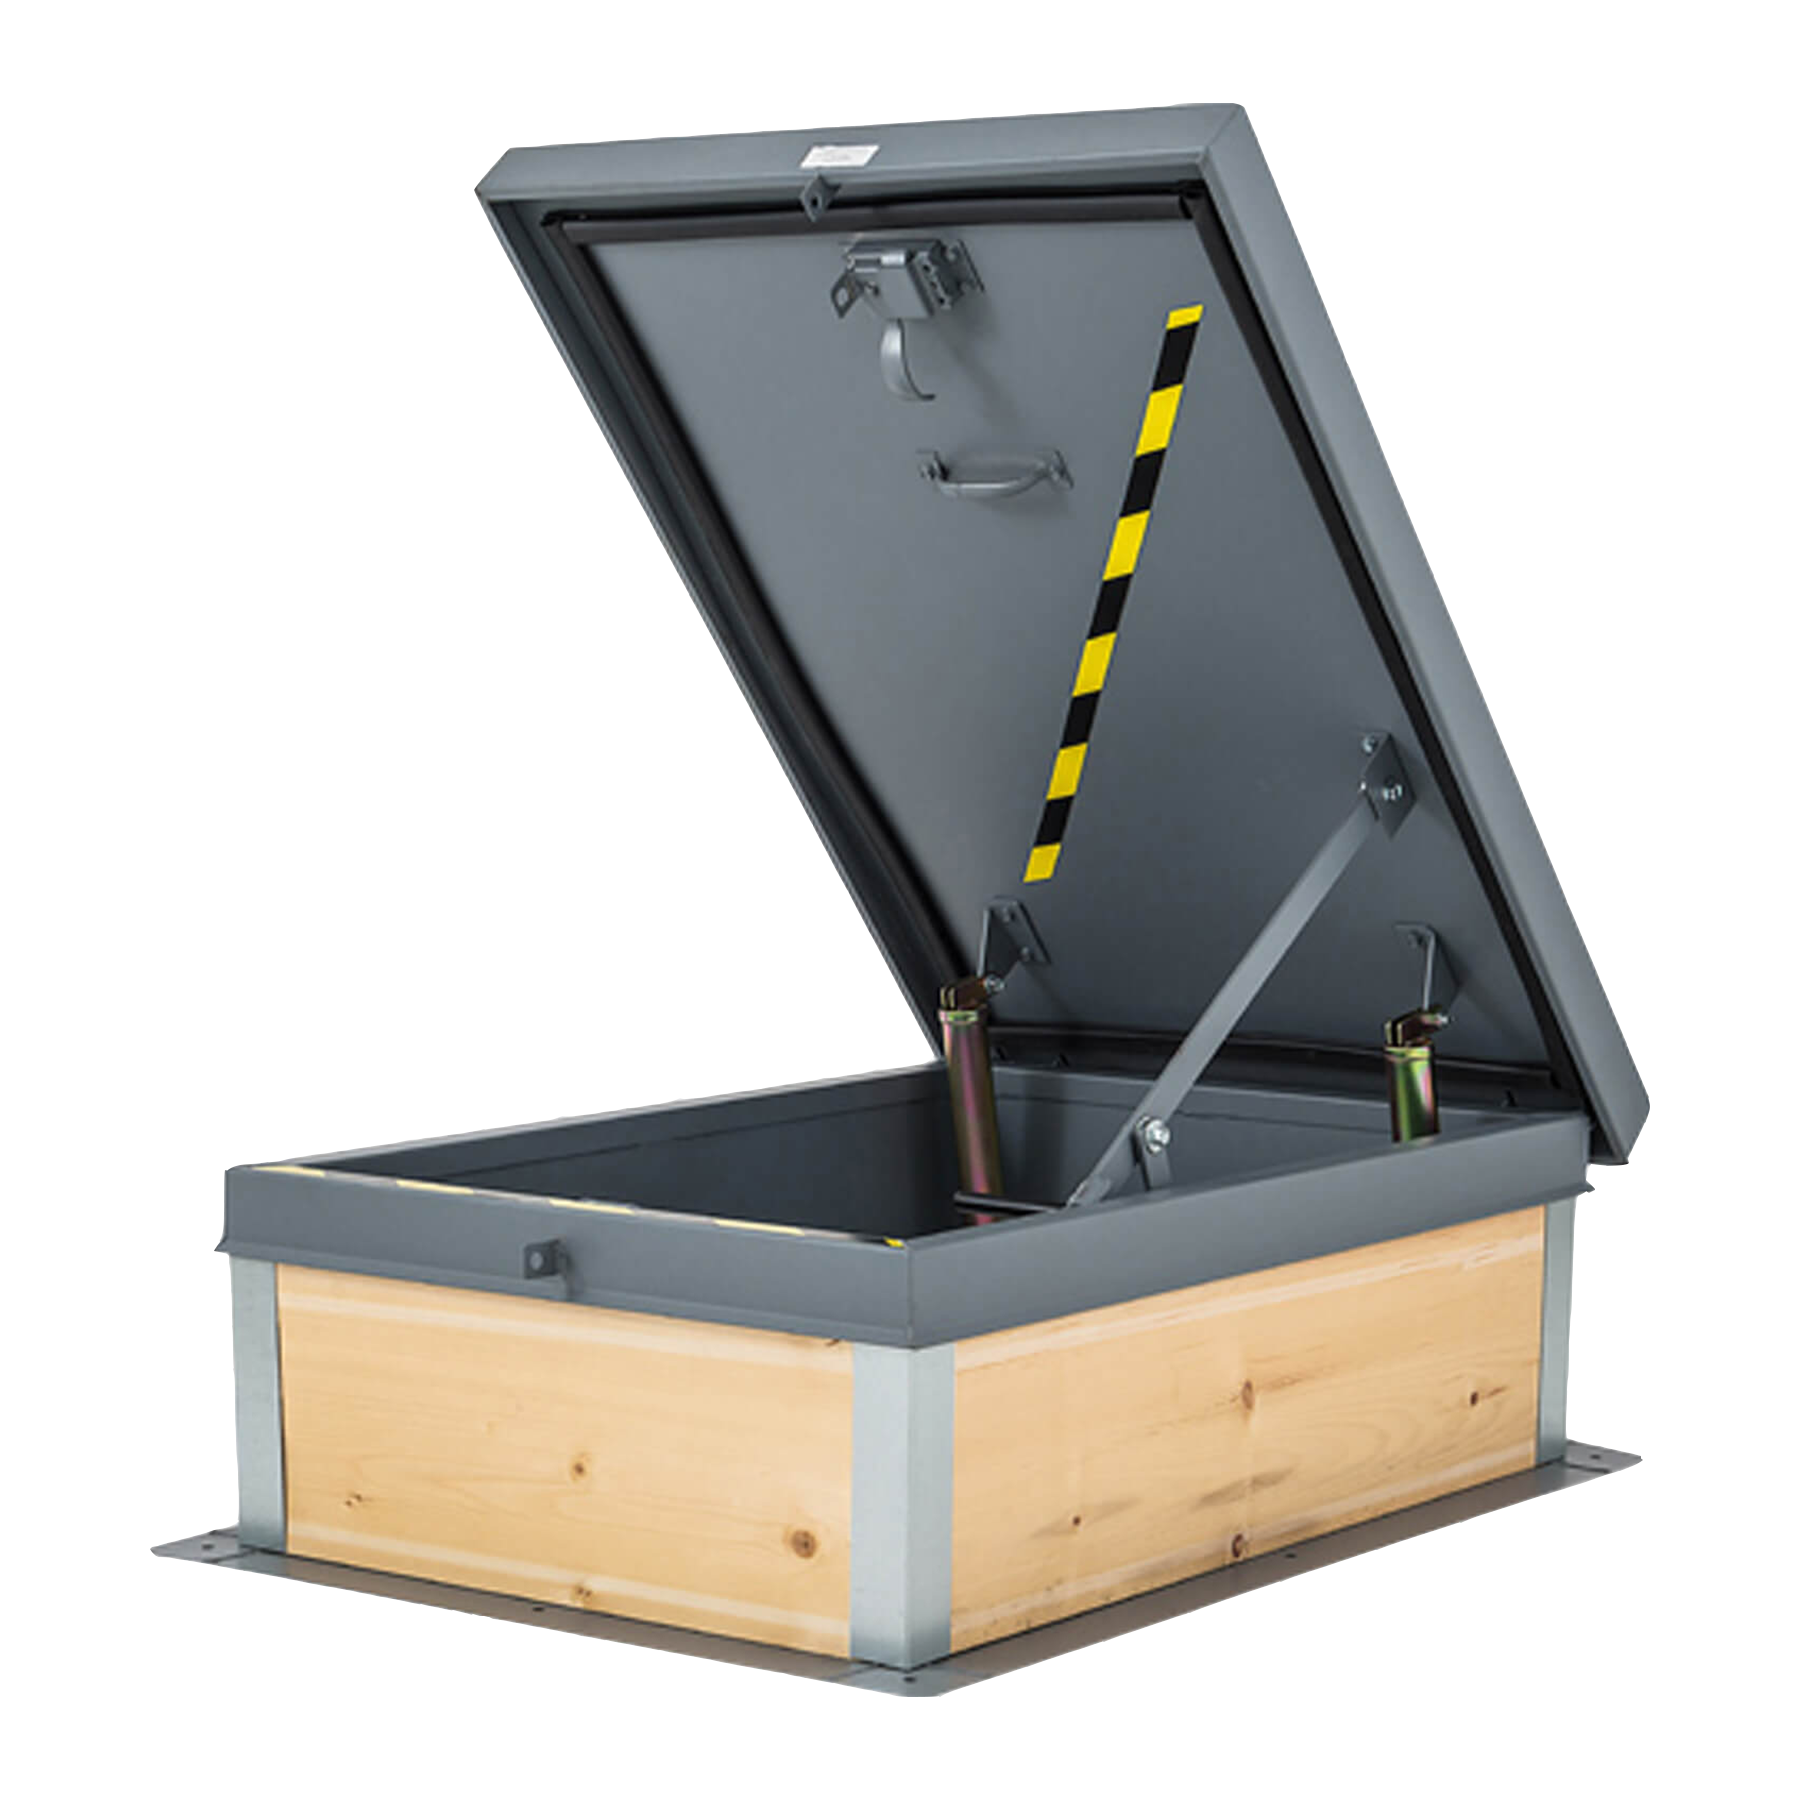 Premium Roof Hatches for Easy Roof Access - Ontario Doors: Your Trusted Source for Quality Roof Hatch Solutions!